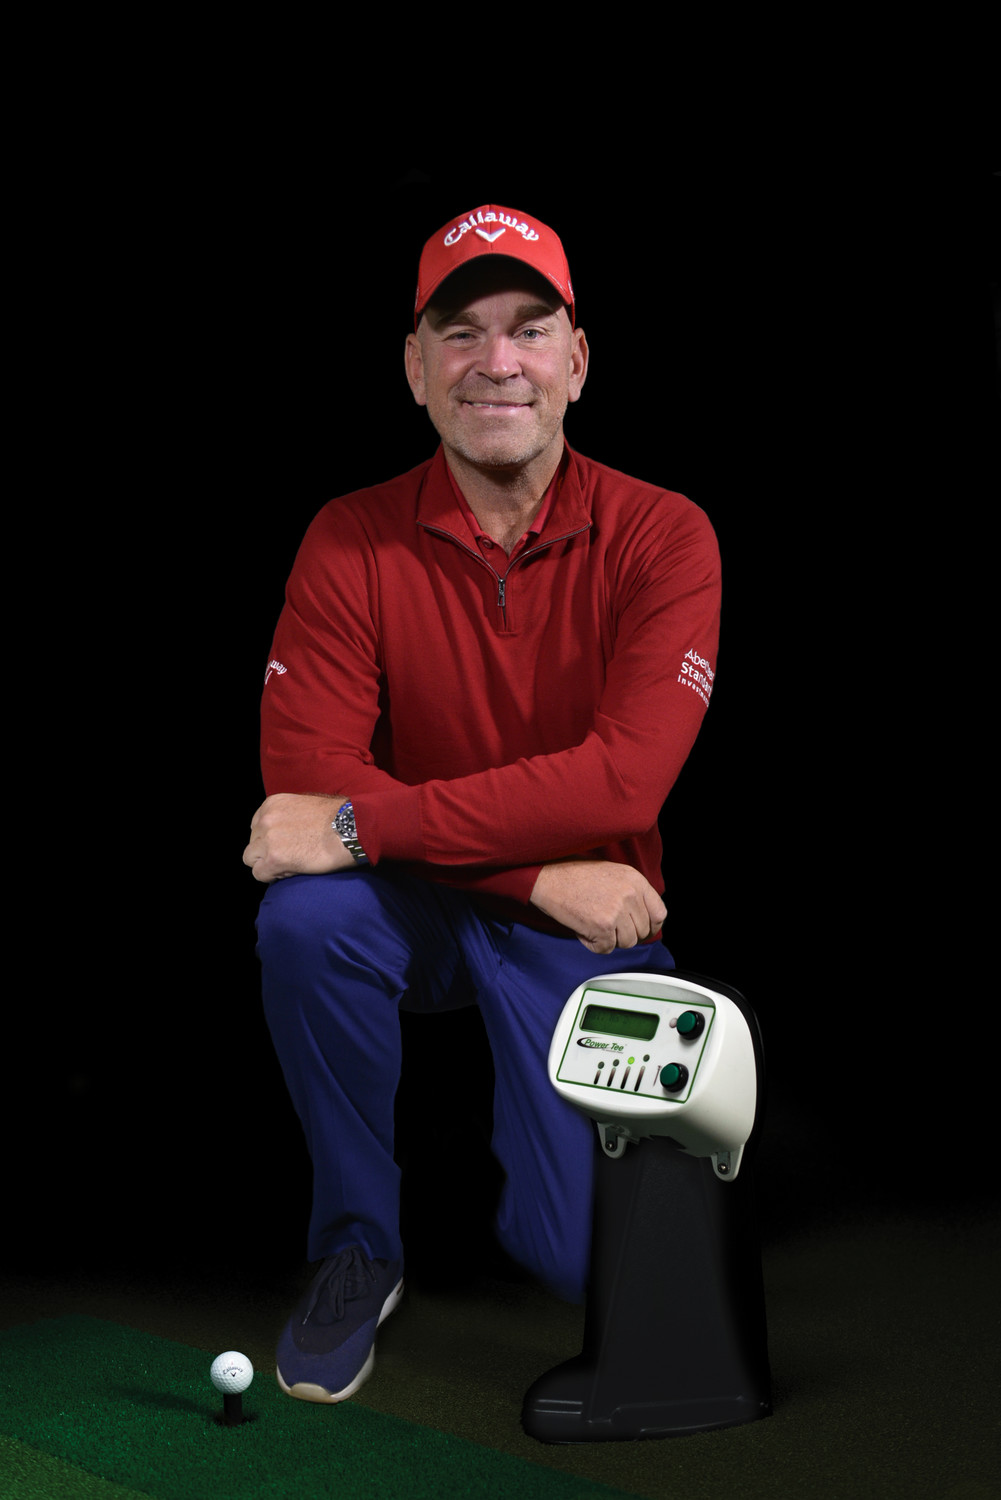 Thomas Bjorn has joined Jim Furyk as the latest brand ambassador for Power Tee, an internationally patented automatic practice system that makes practicing golf more efficient, effective and fun.